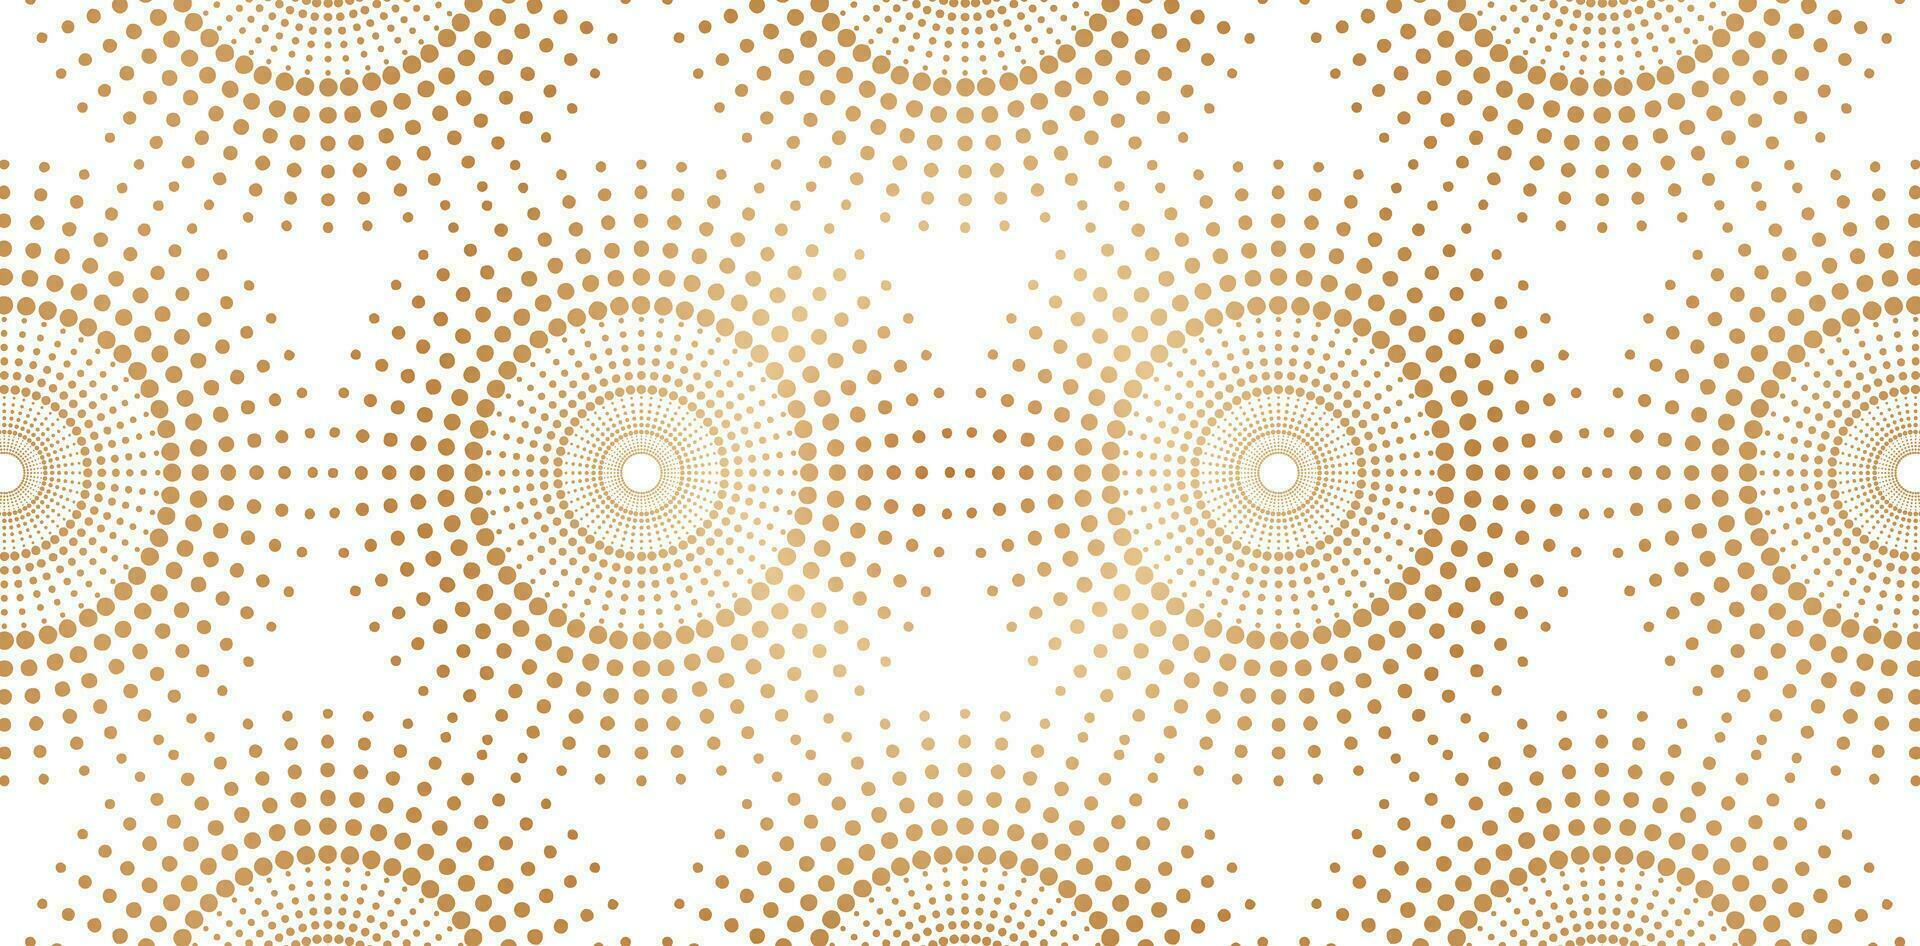 vector illustration Seamlessly patterned halftone dots and circles Abstracted backgrounds for Fashionable wrapping papers, book cover, Digital interfaces, prints design templates material advertising